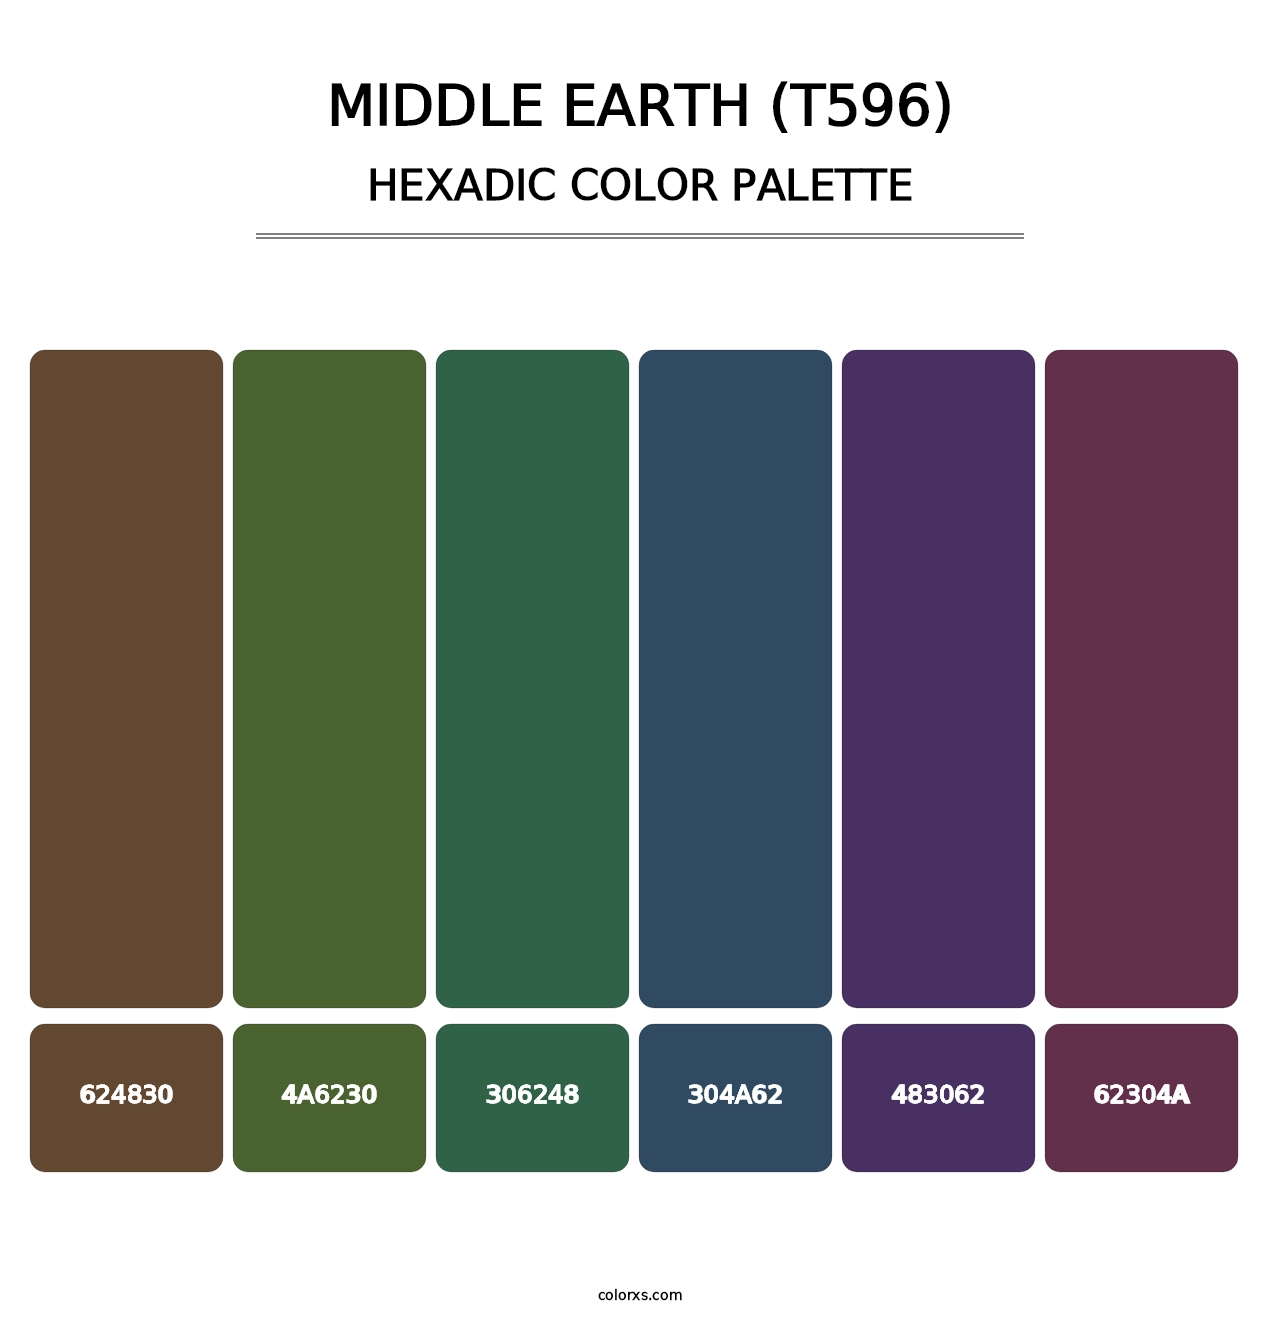 Middle Earth (T596) - Hexadic Color Palette